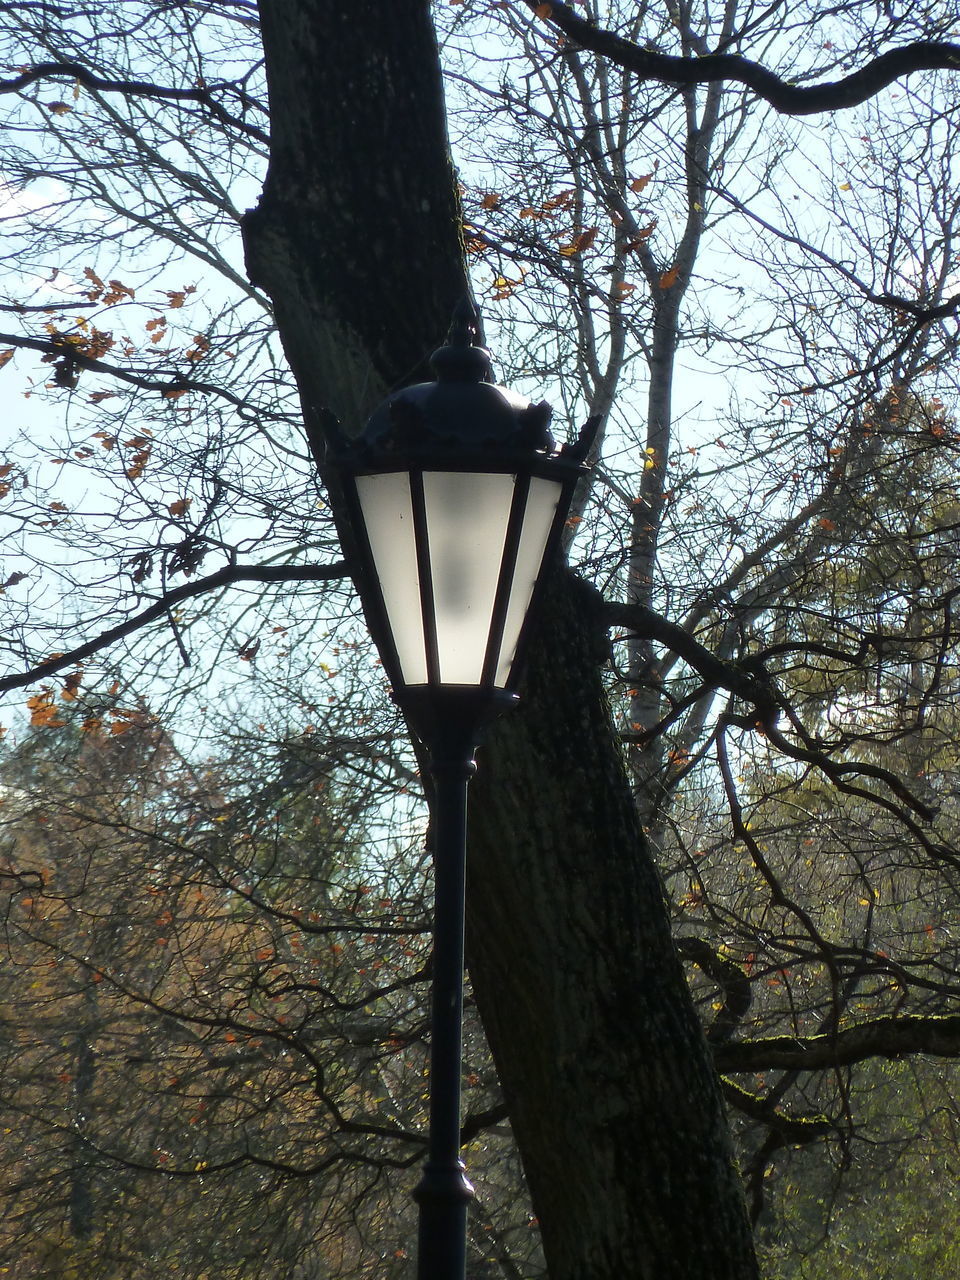 LOW ANGLE VIEW OF STREET LIGHT AND BARE TREES